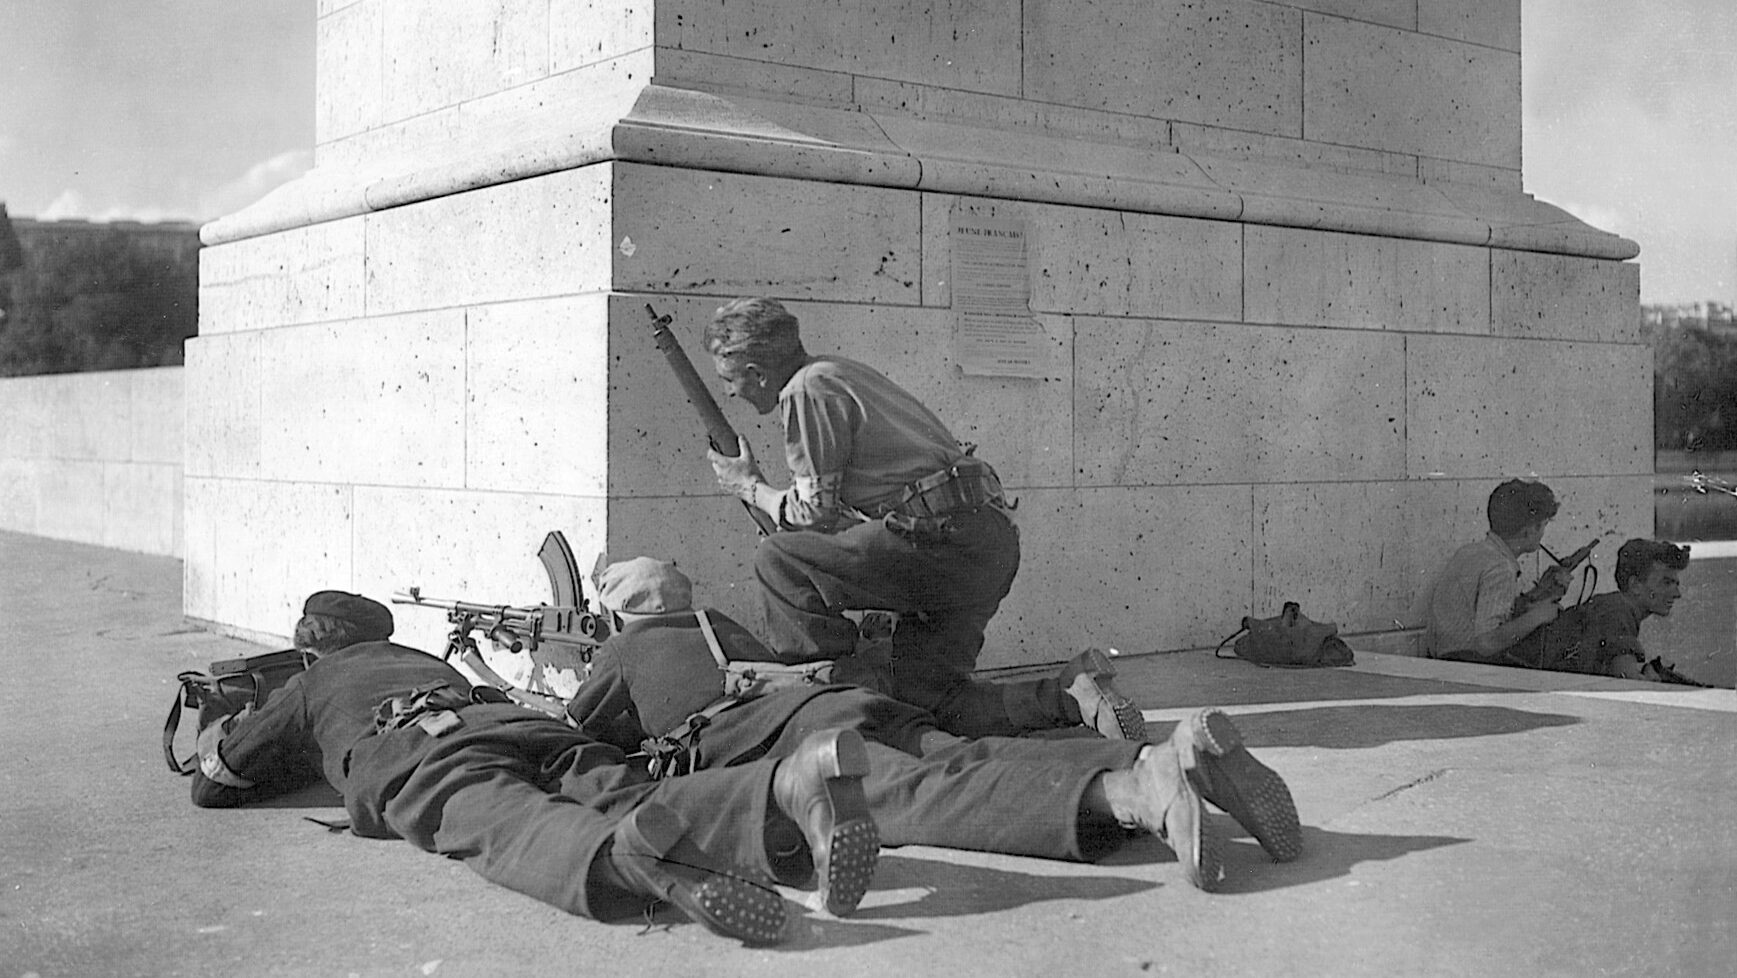 A squad of French Resistance fighters, some sighting automatic weapons, anticipates action against the Nazis, August 1944.